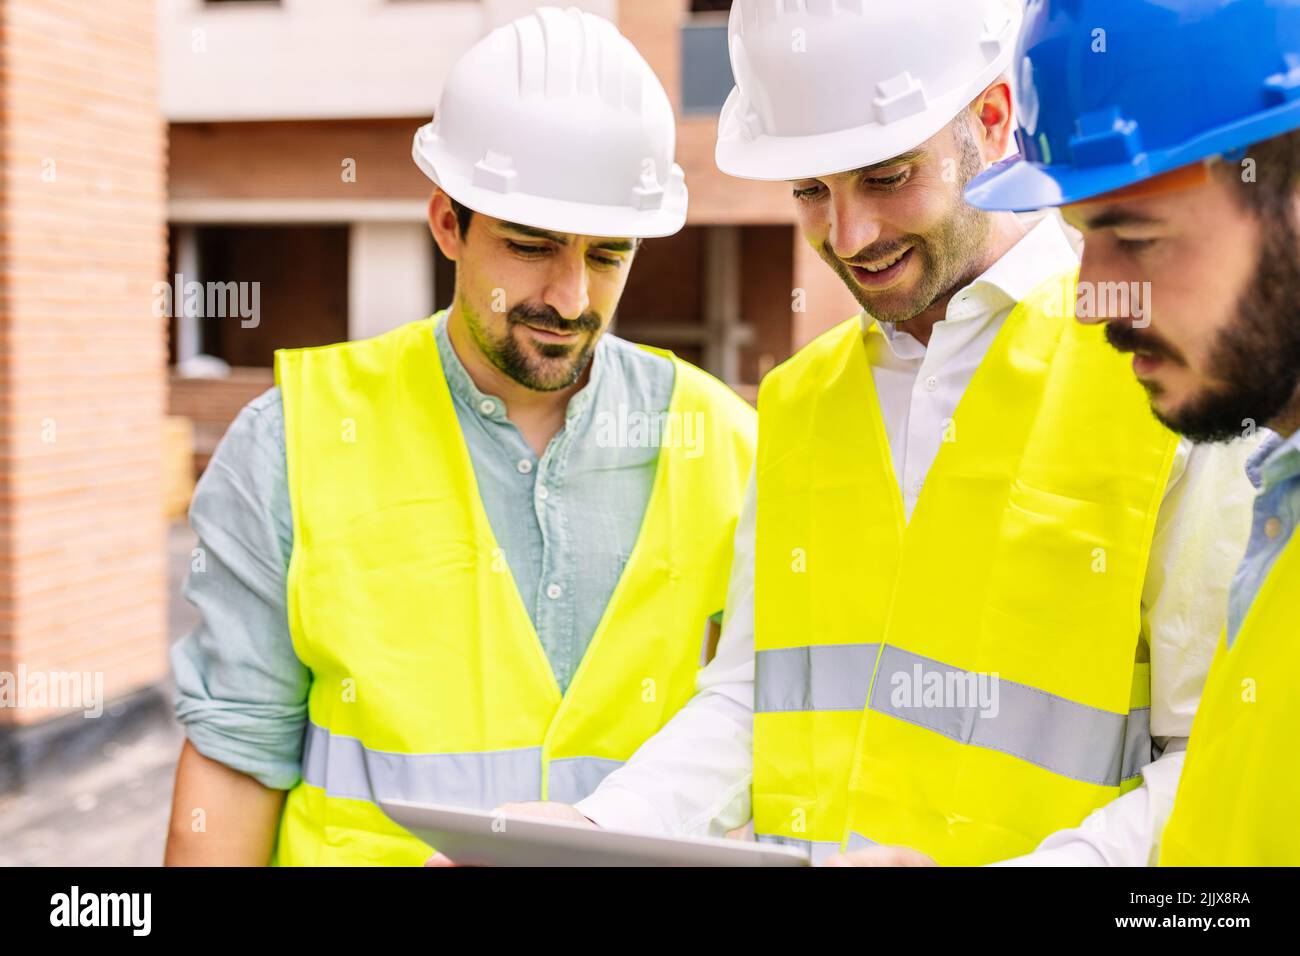 Construction architect engineers working on building site Stock Photo